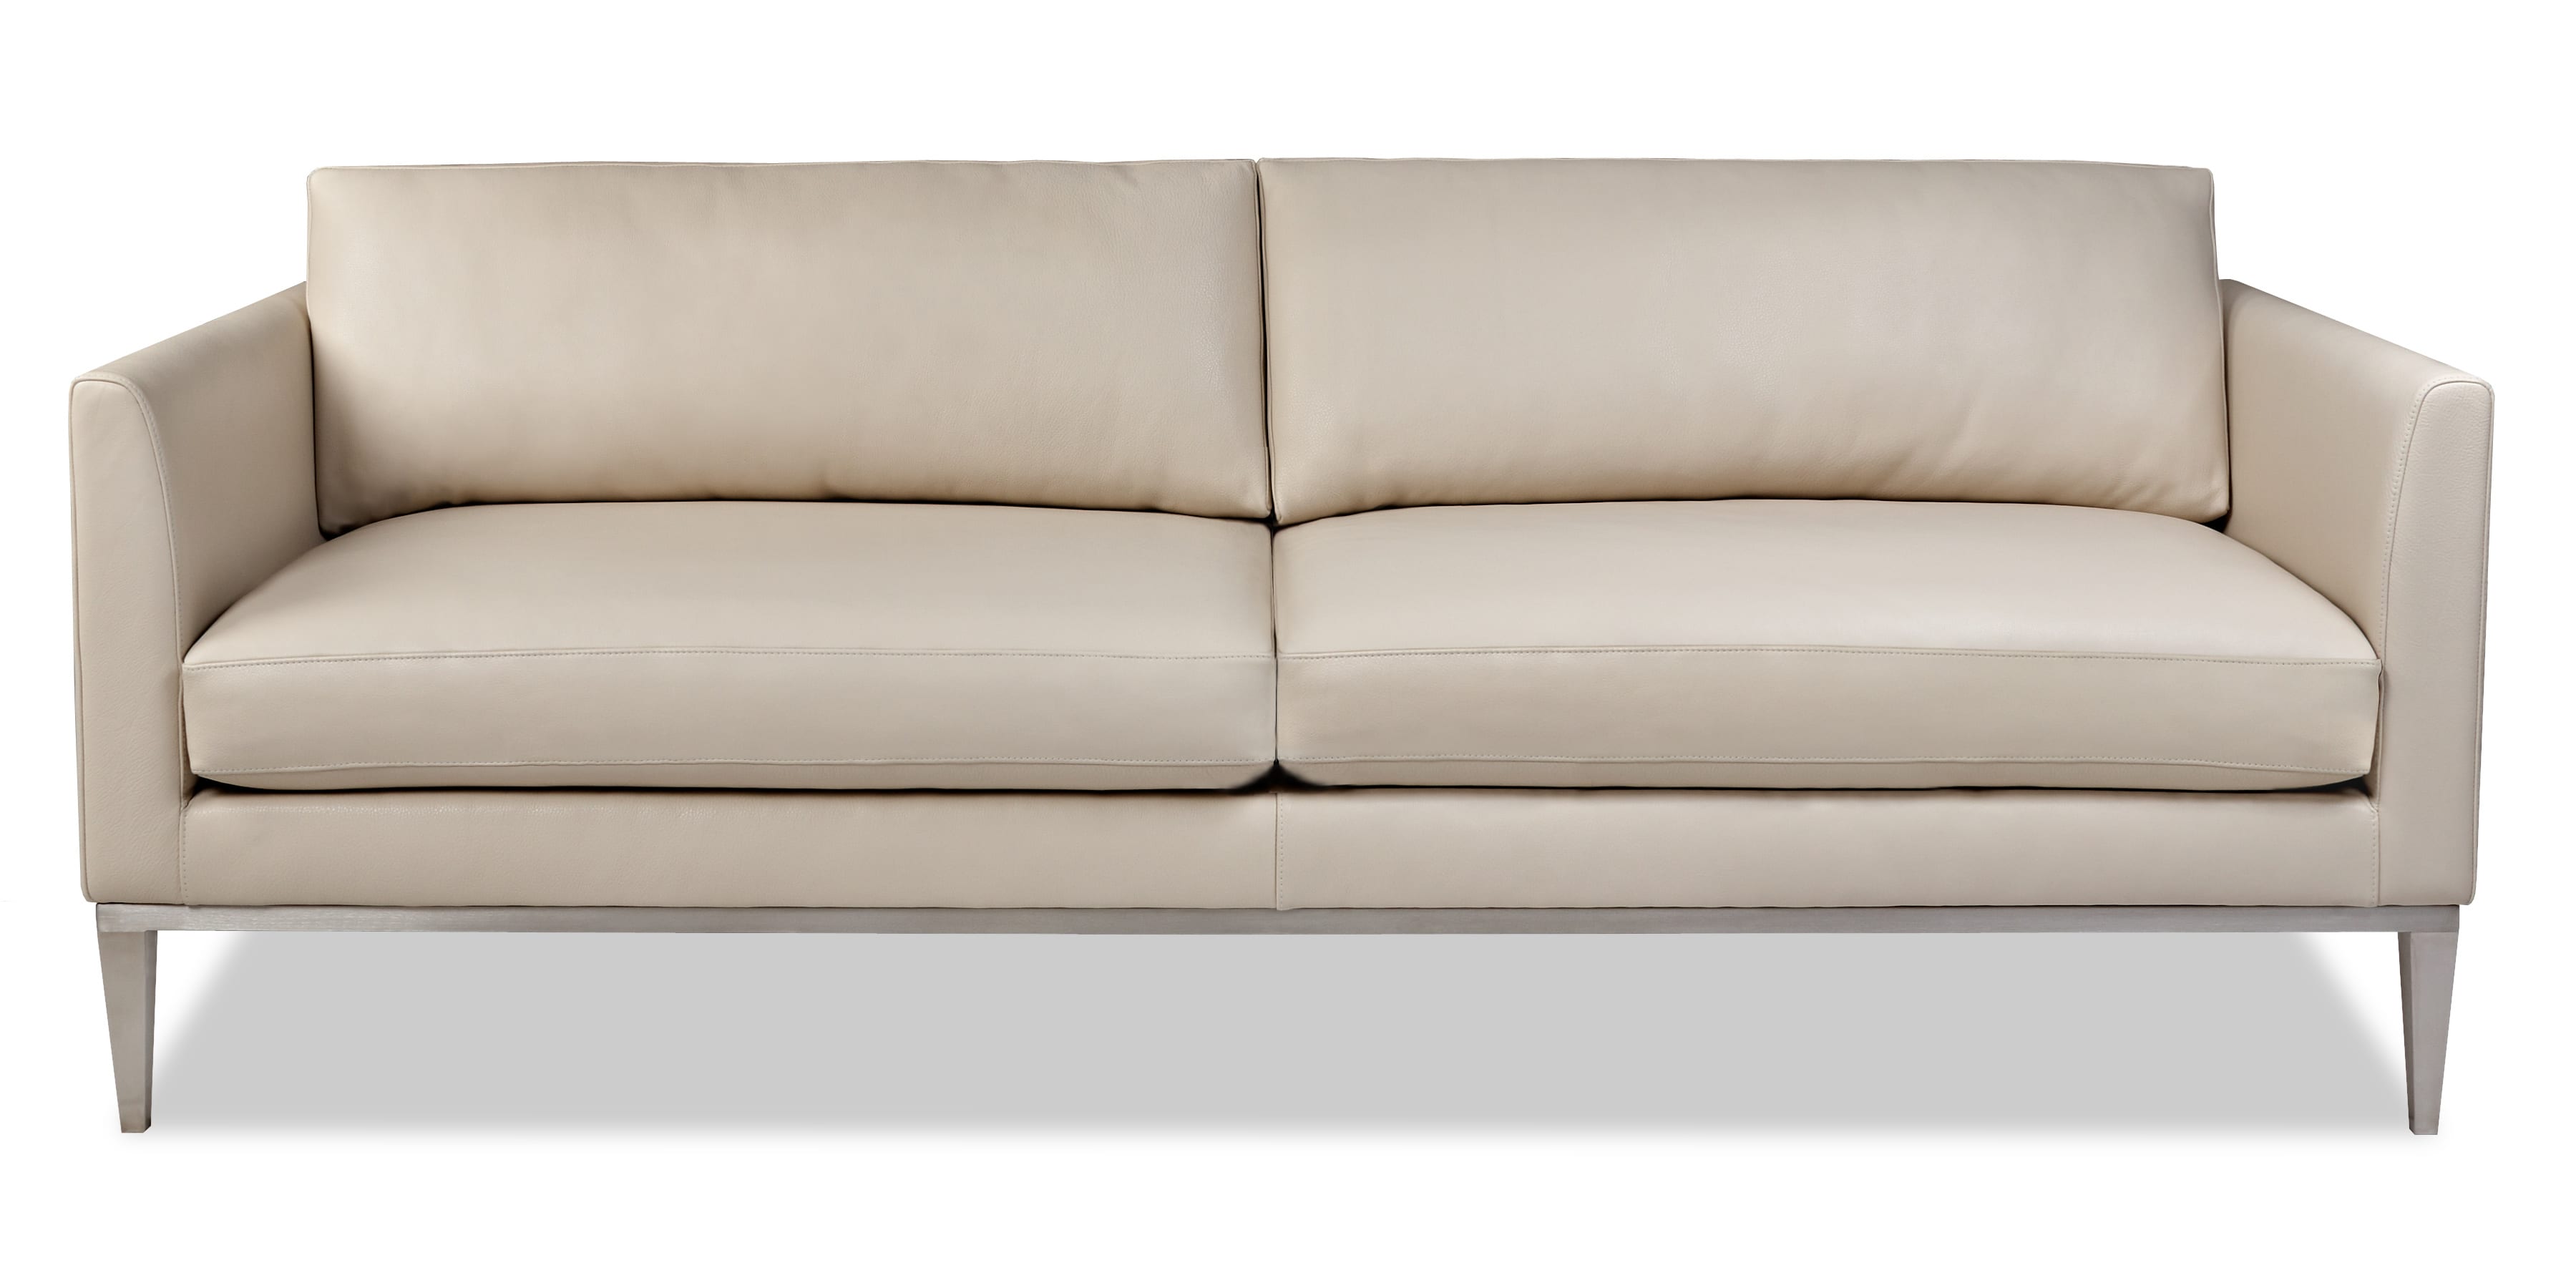 american leather henley sofa price